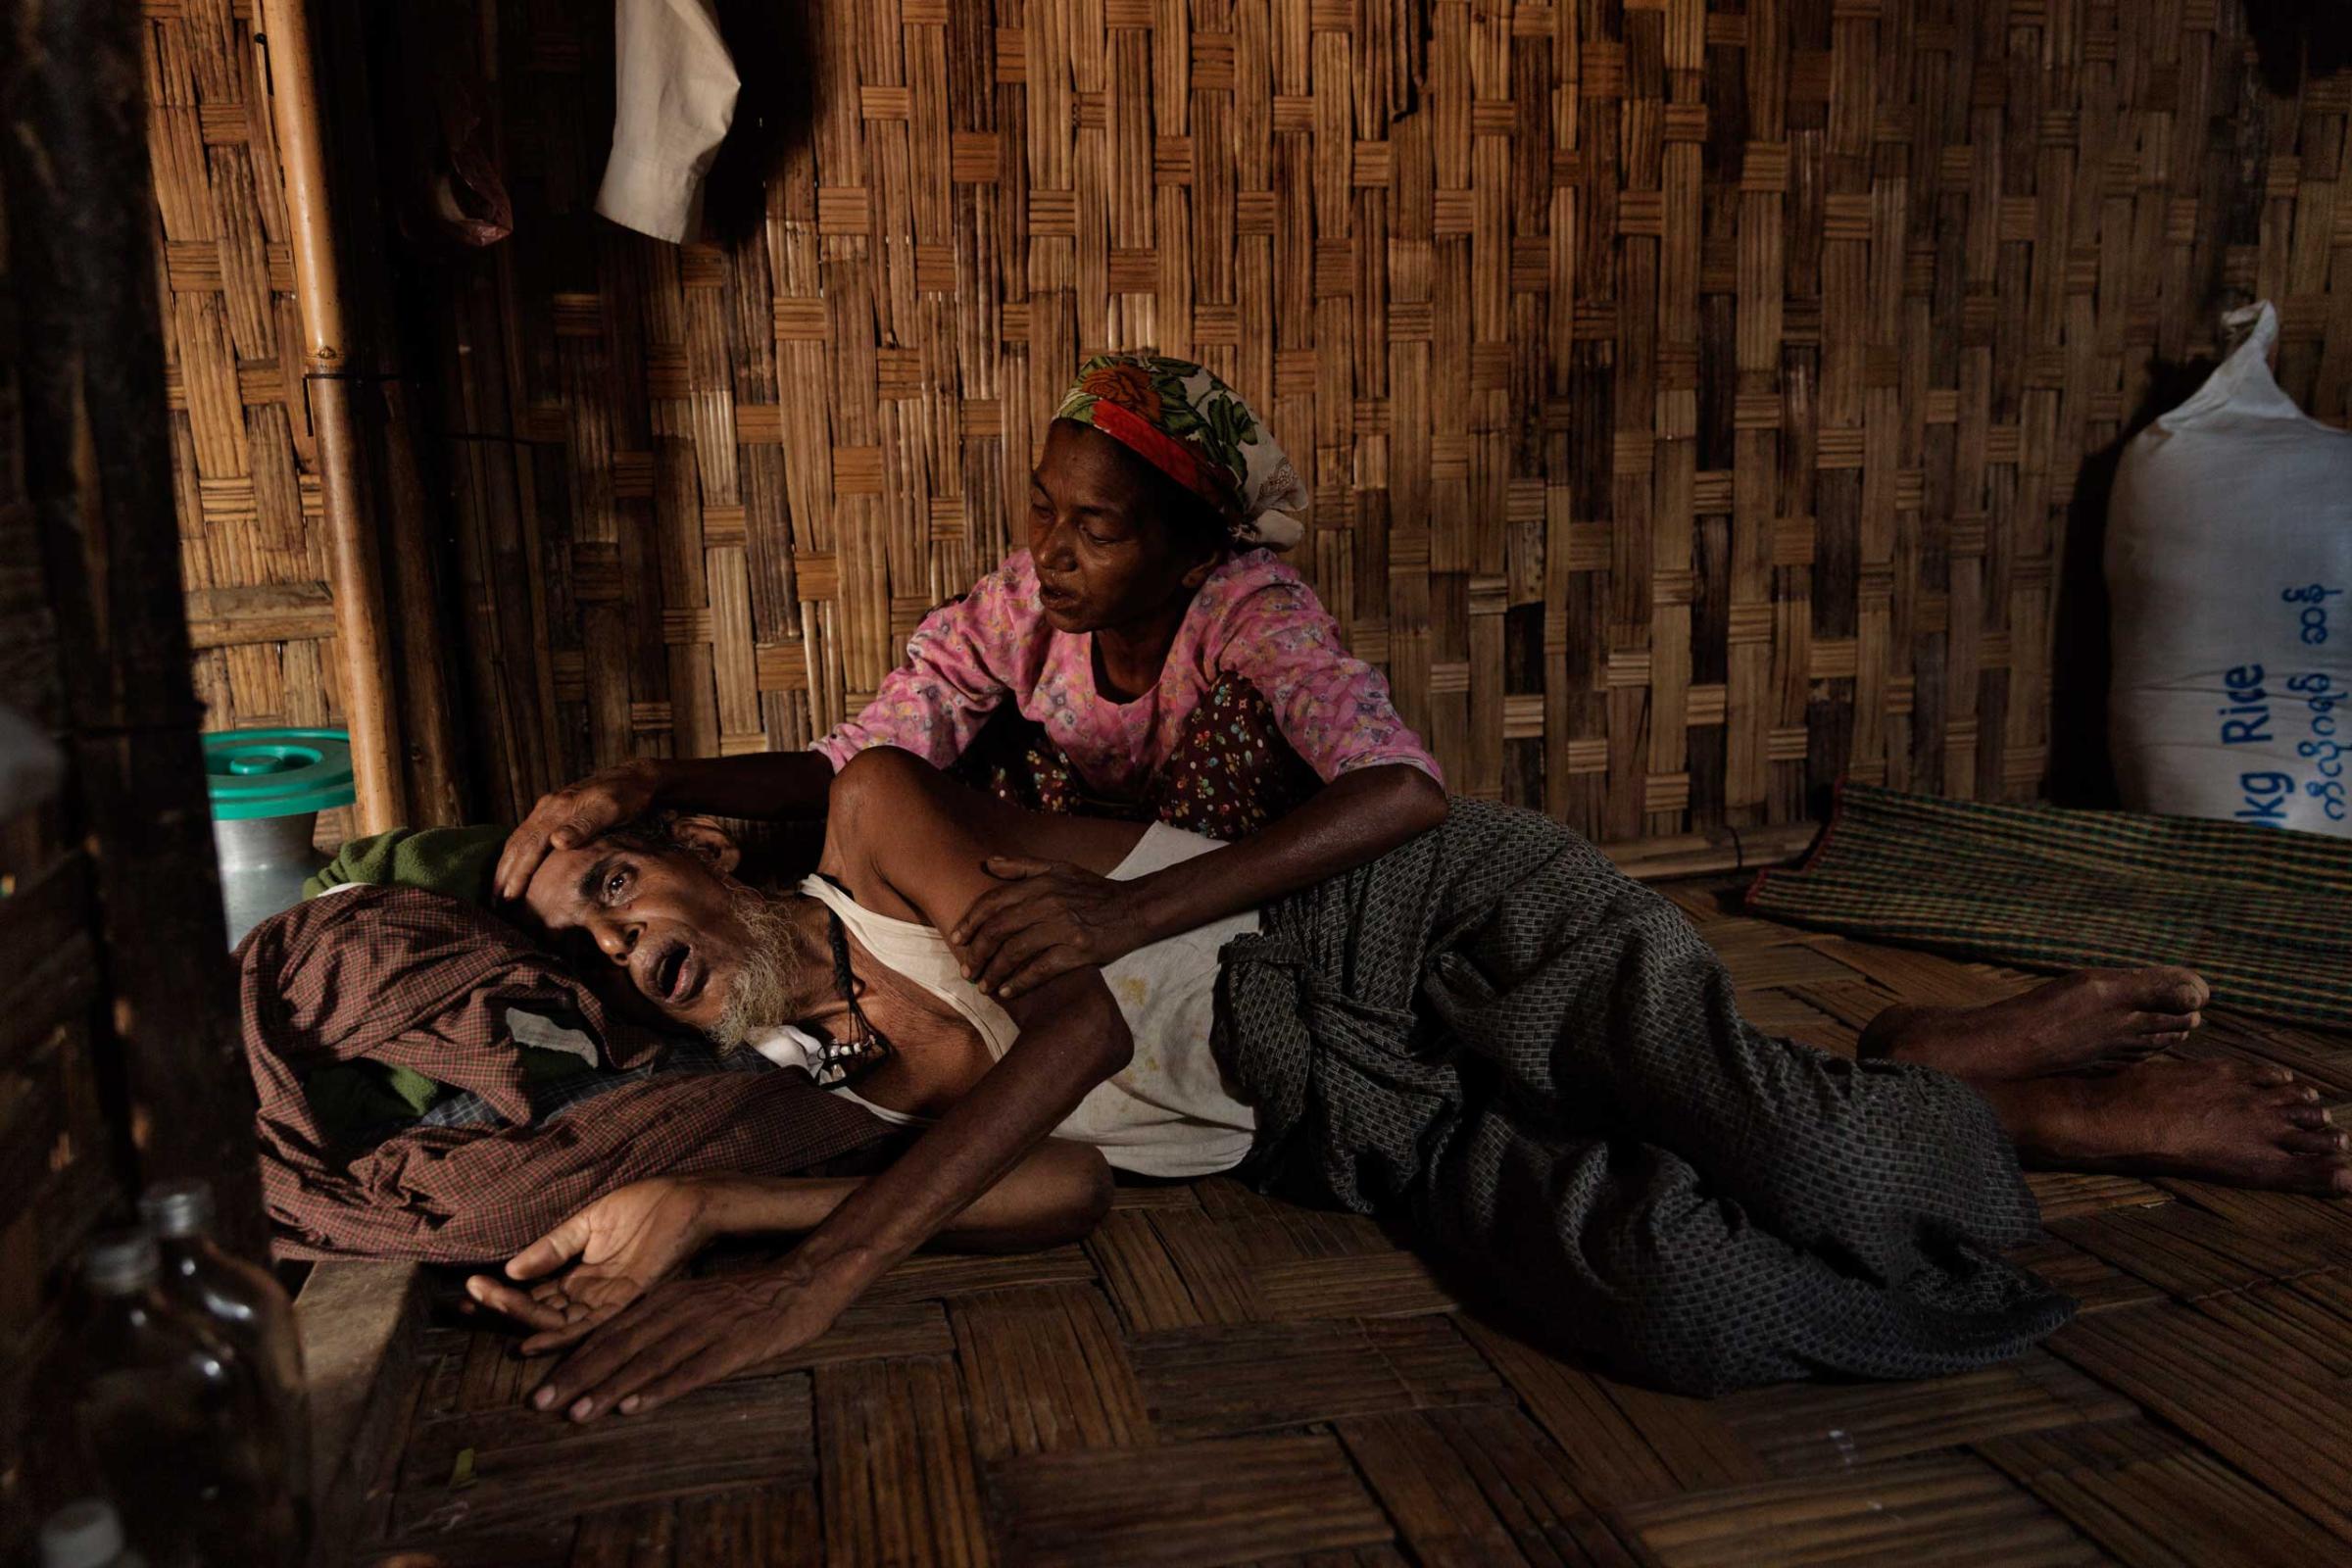 In Burma, more than 140,000 minority Rohingya Muslims have been forced to live in camps, where disease and despair have taken root. Here, Abdul Kadir, 65, who has a severe stomach ailment and malnutrition, is cared for by his wife in one of the camps, June 9, 2014.